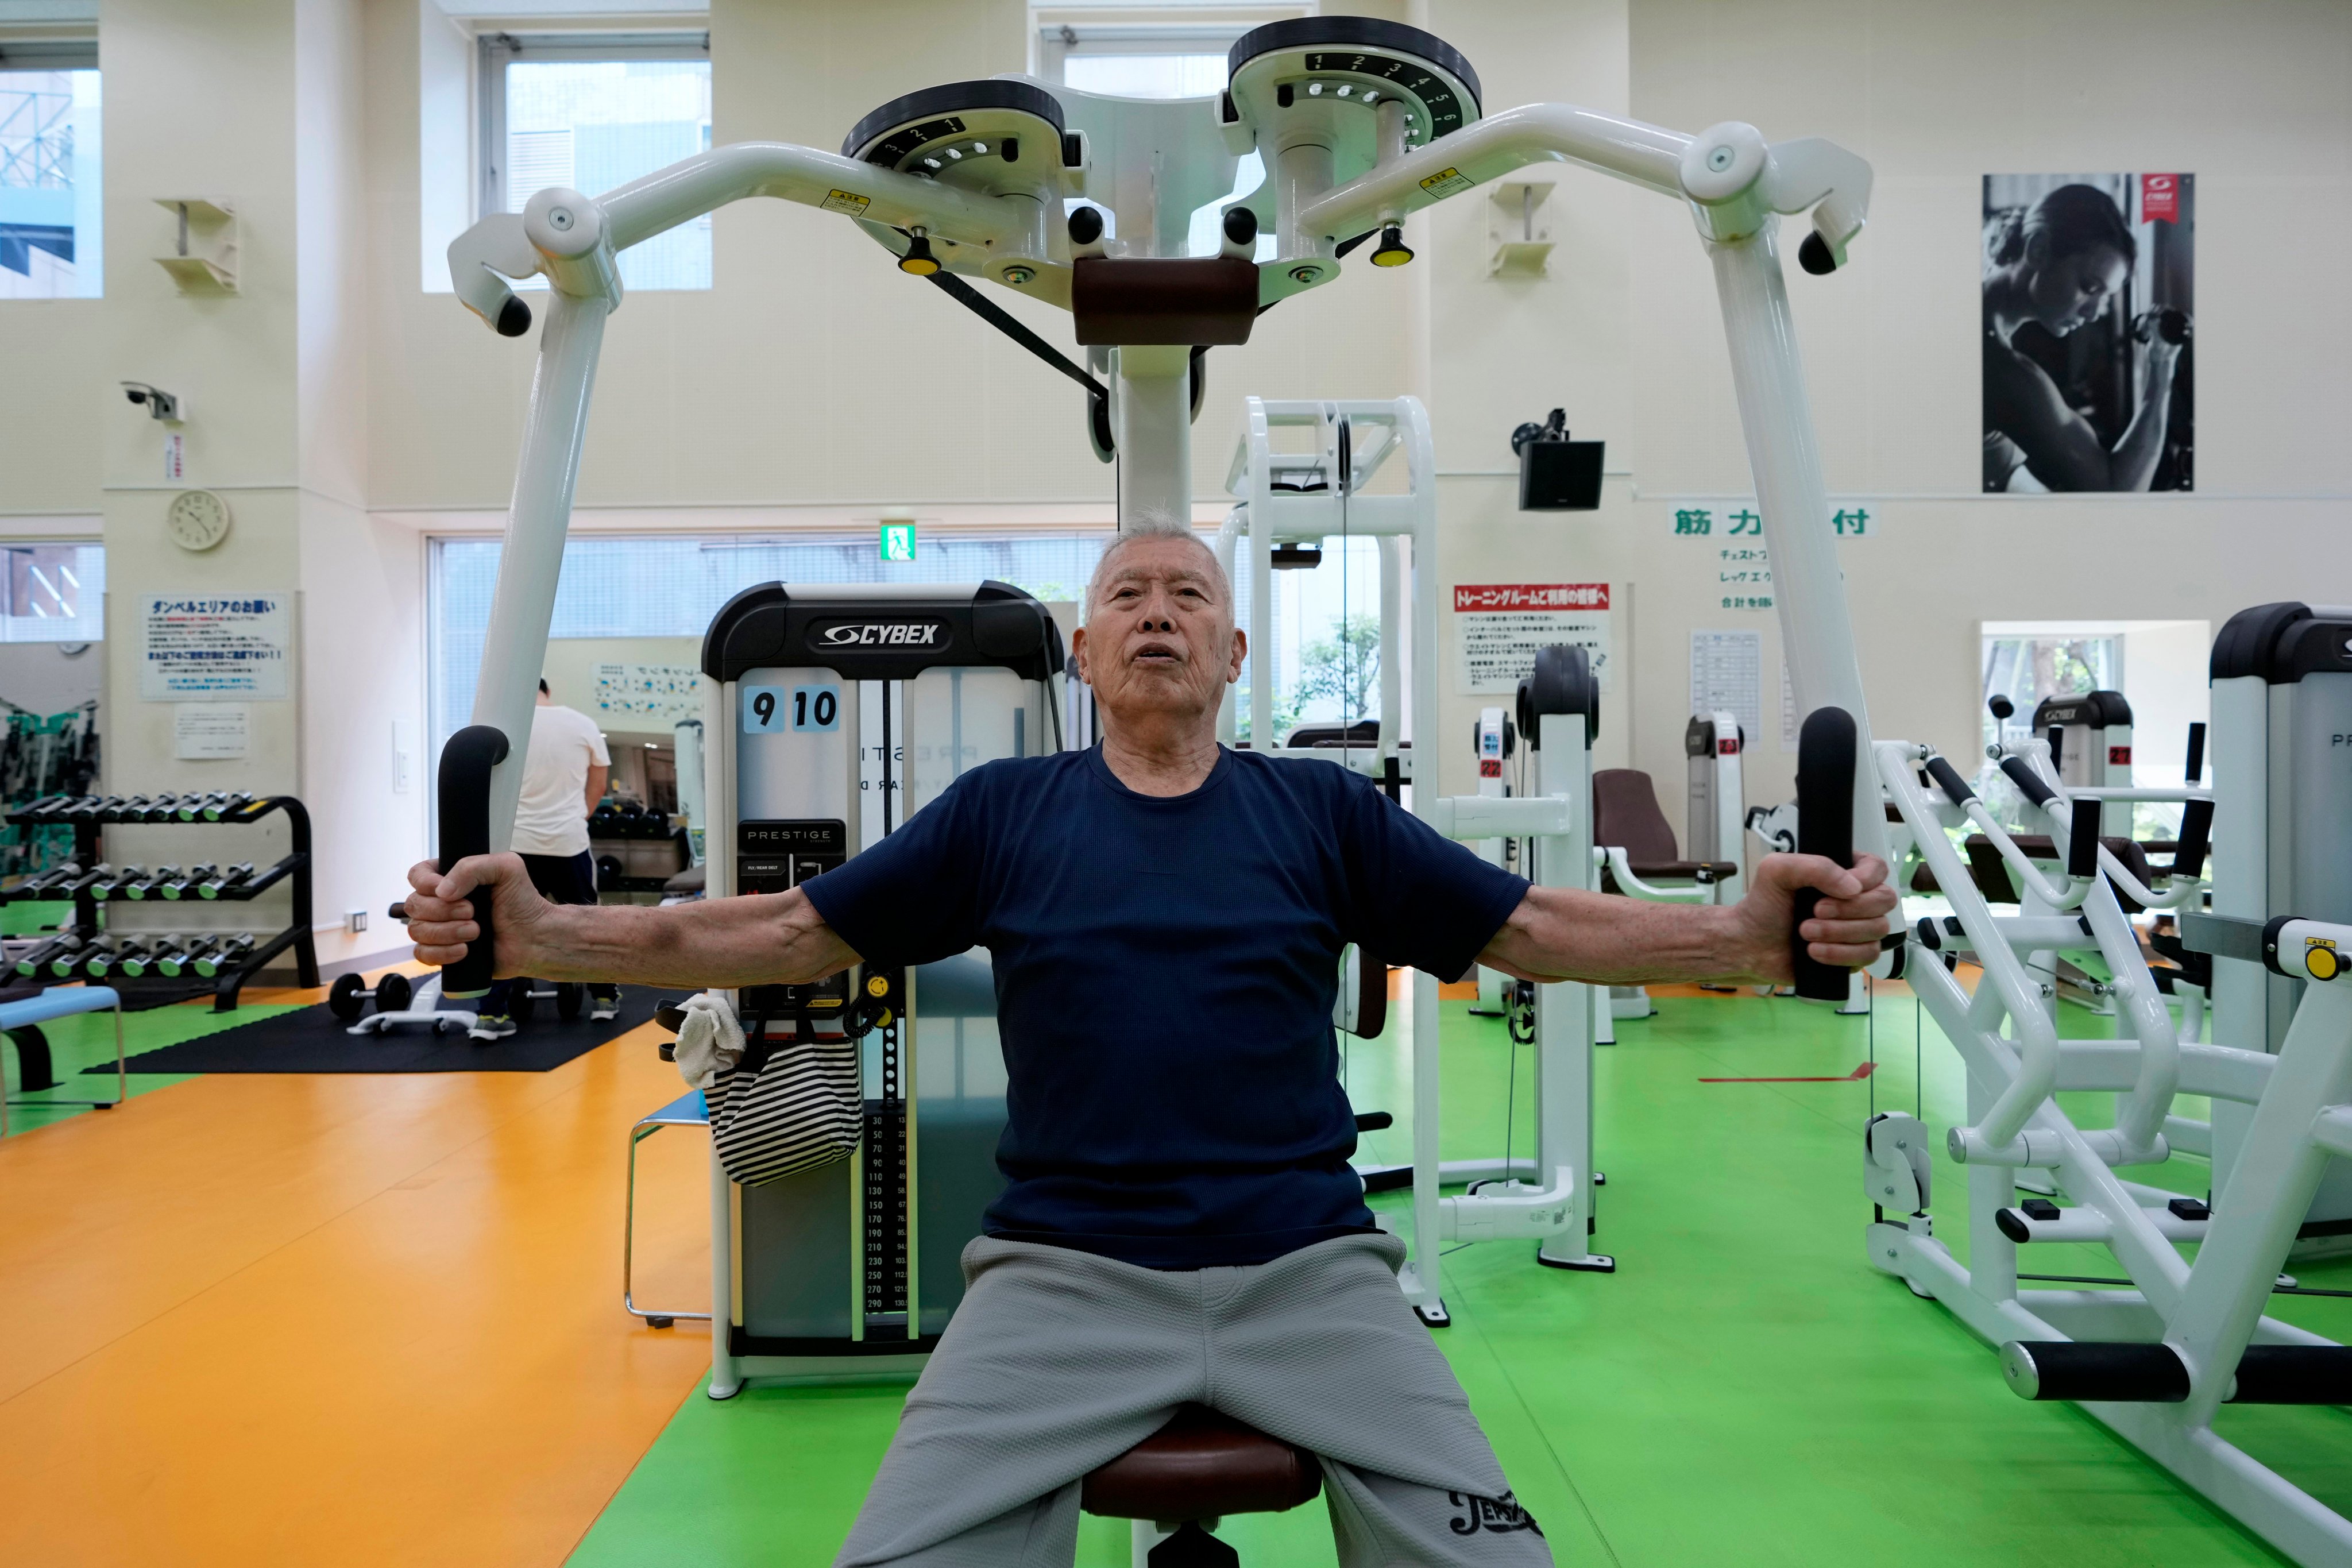 Shigeo Takahashi, 83, uses a pec deck machine as he works out at the Fukagawa Sports Centre in Tokyo, Japan. Photo: AP